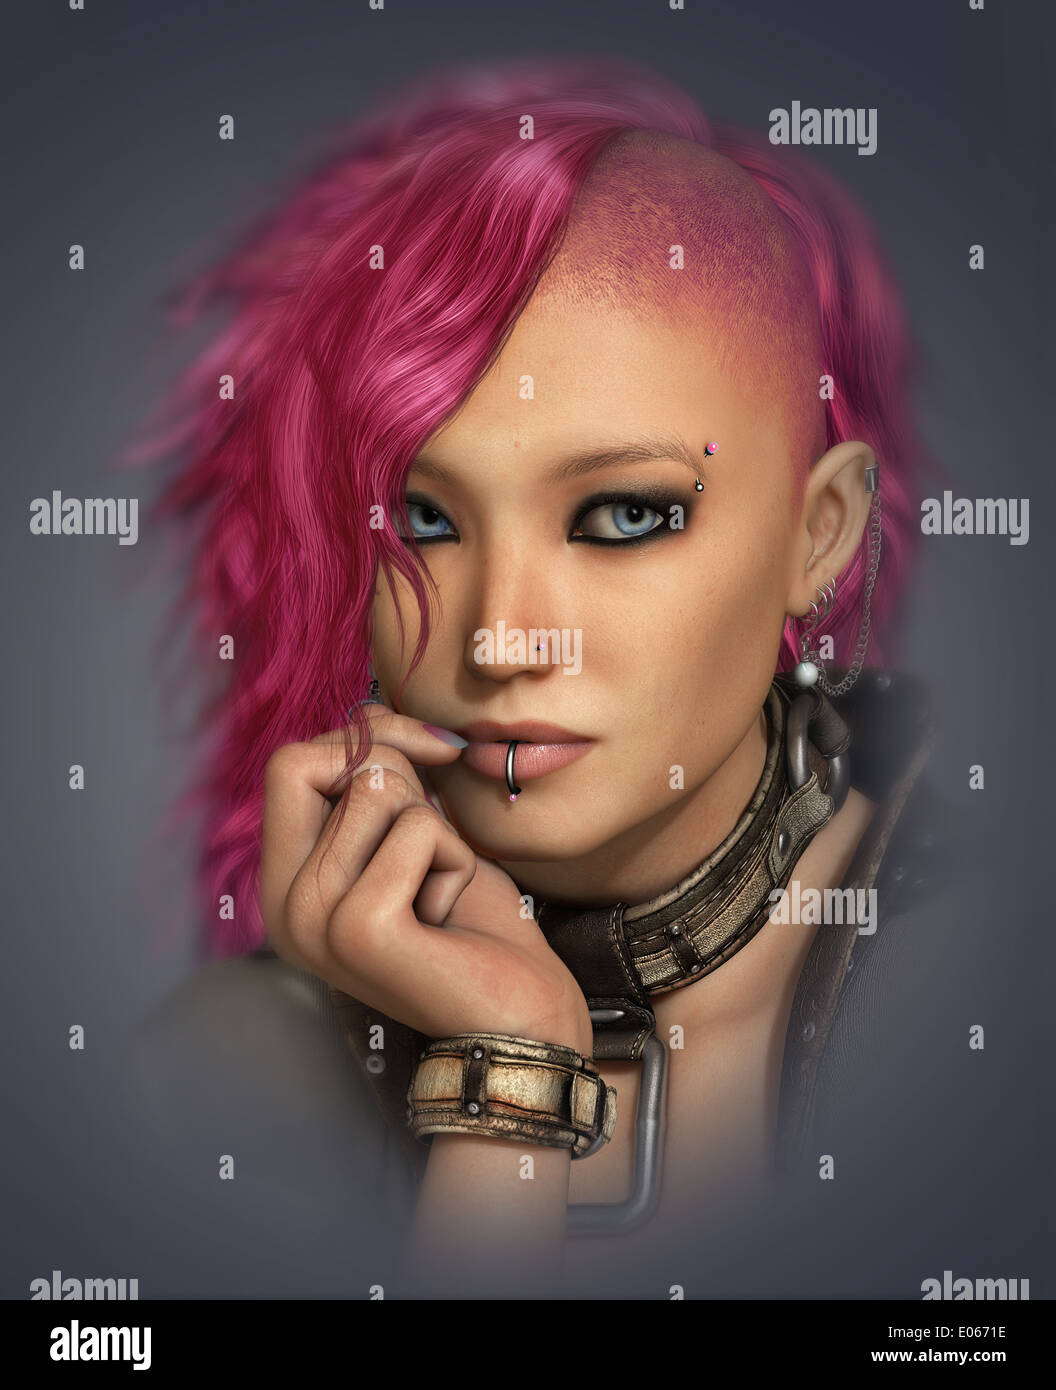 3D computer graphics of a portrait of a girl with pink Mohawk and outfit in Punk style Stock Photo